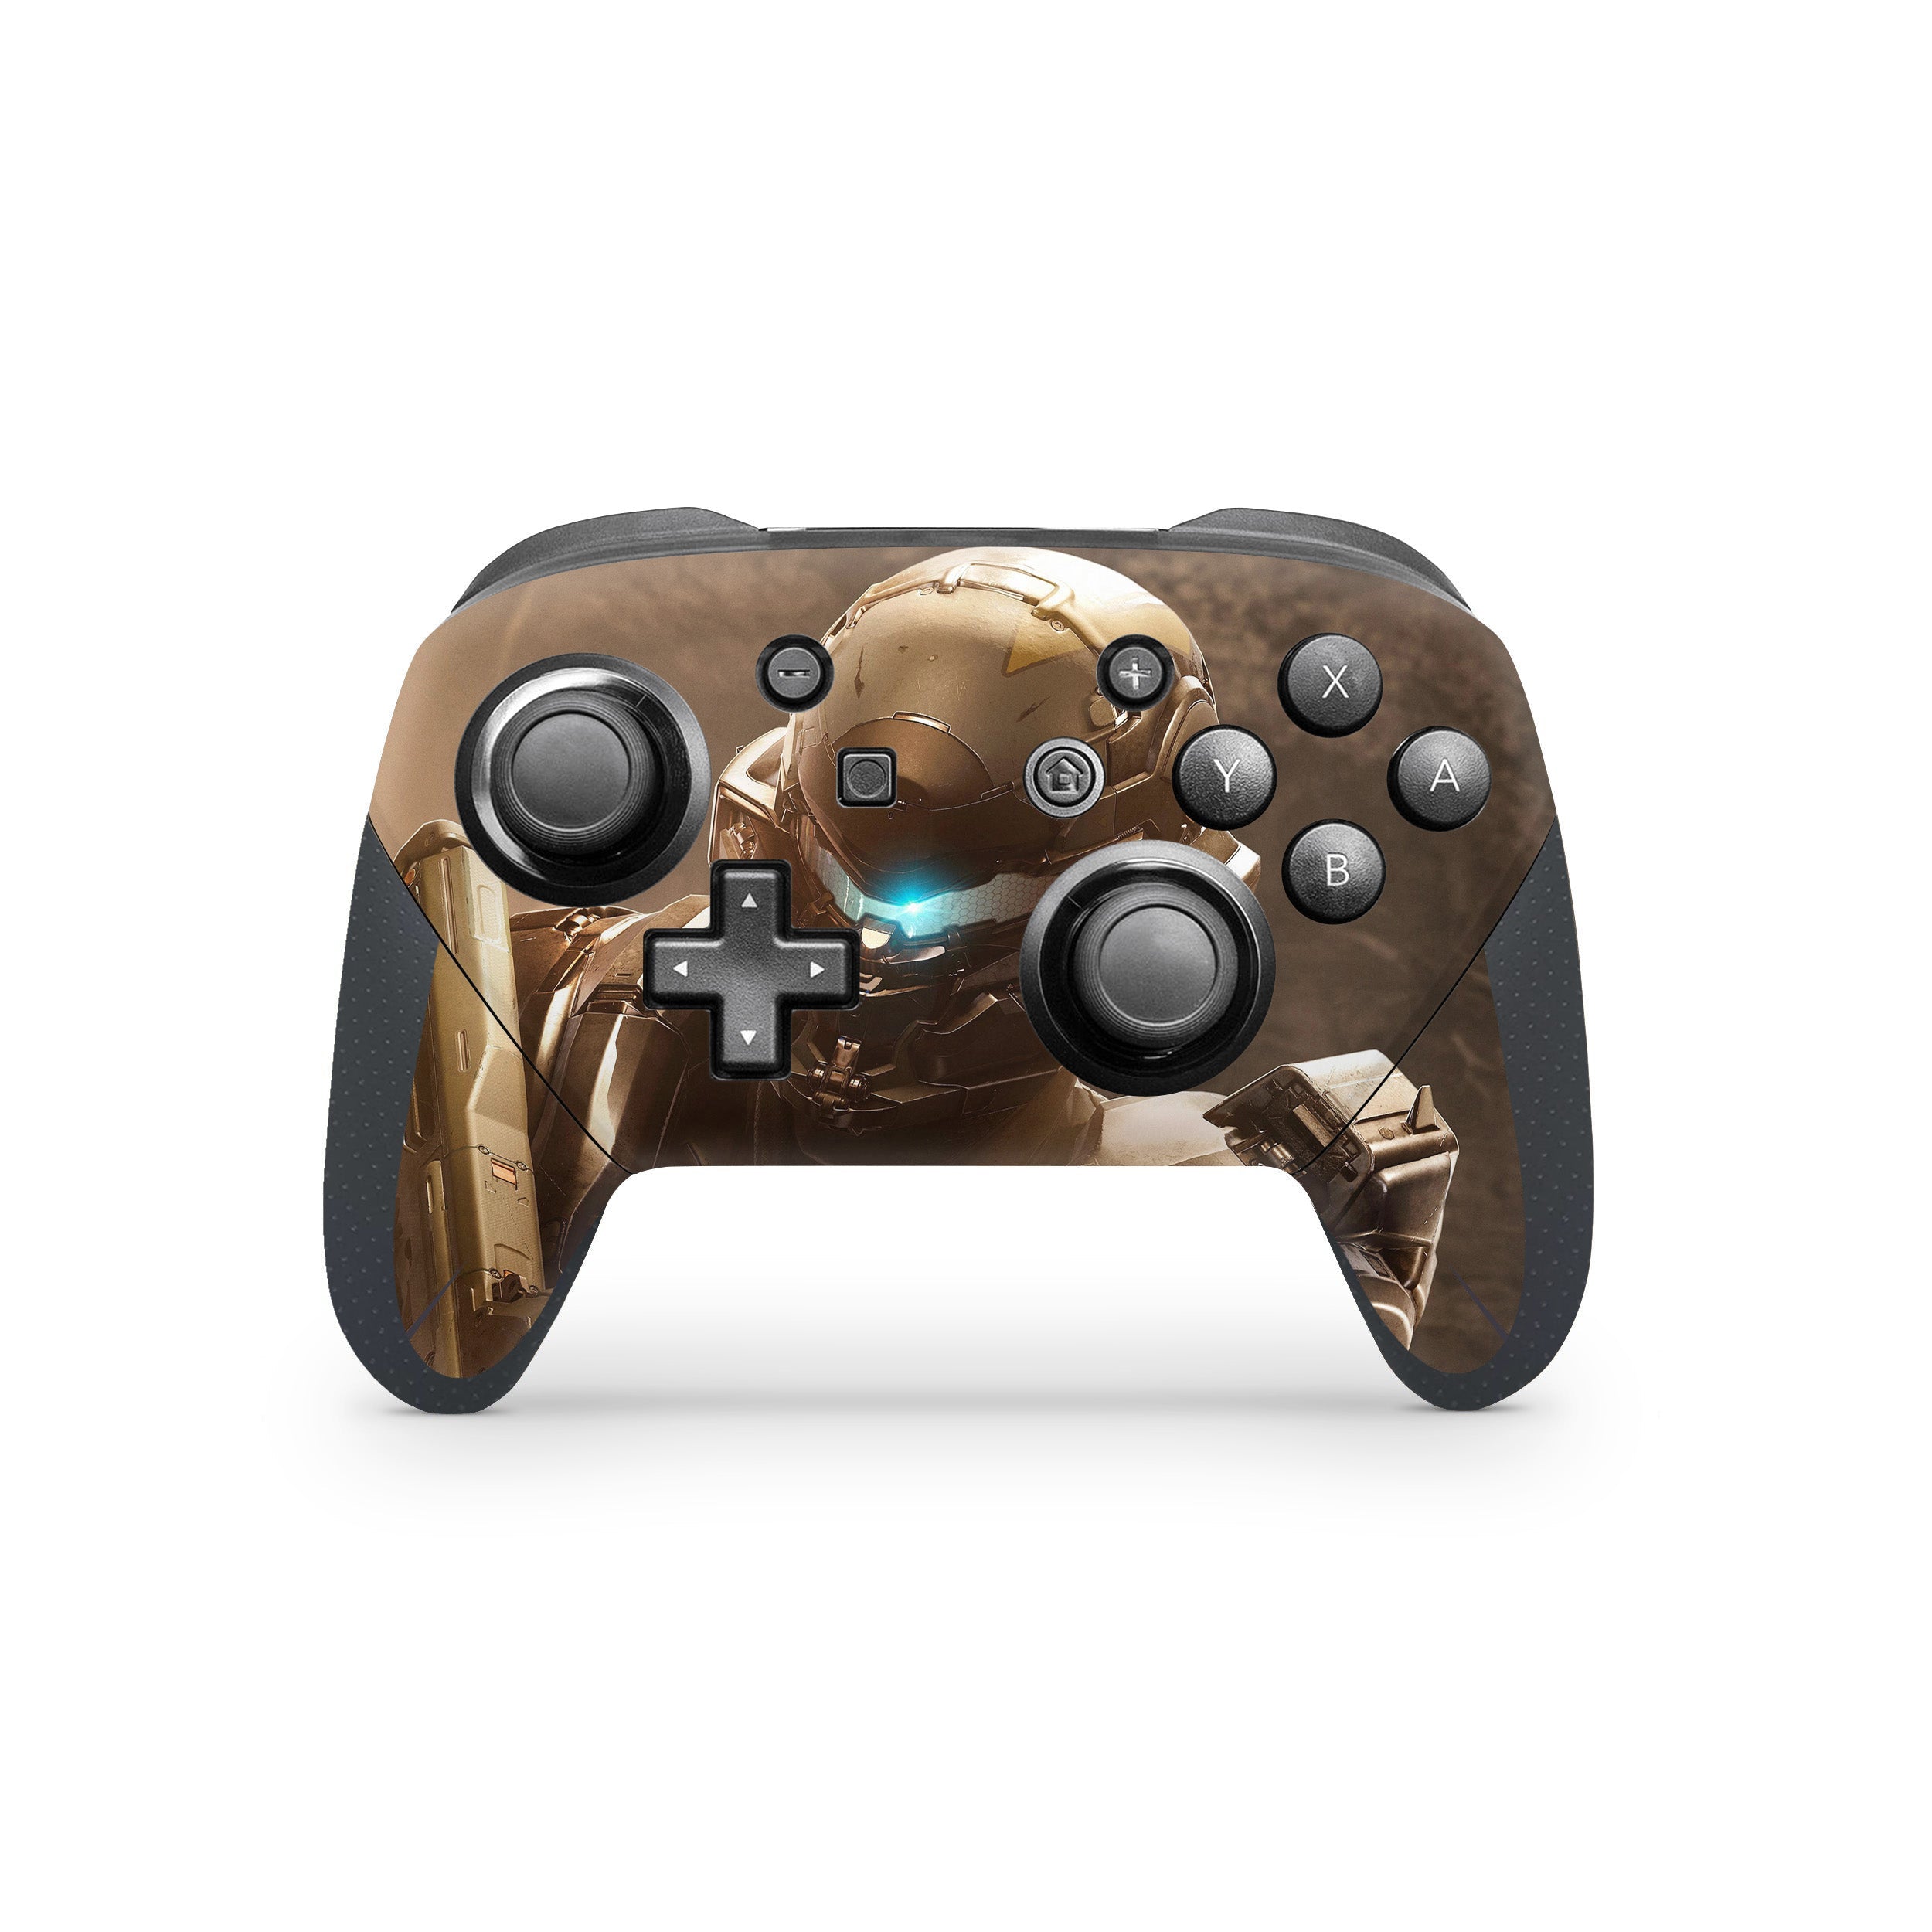 A video game skin featuring a Halo 5 design for the Switch Pro Controller.